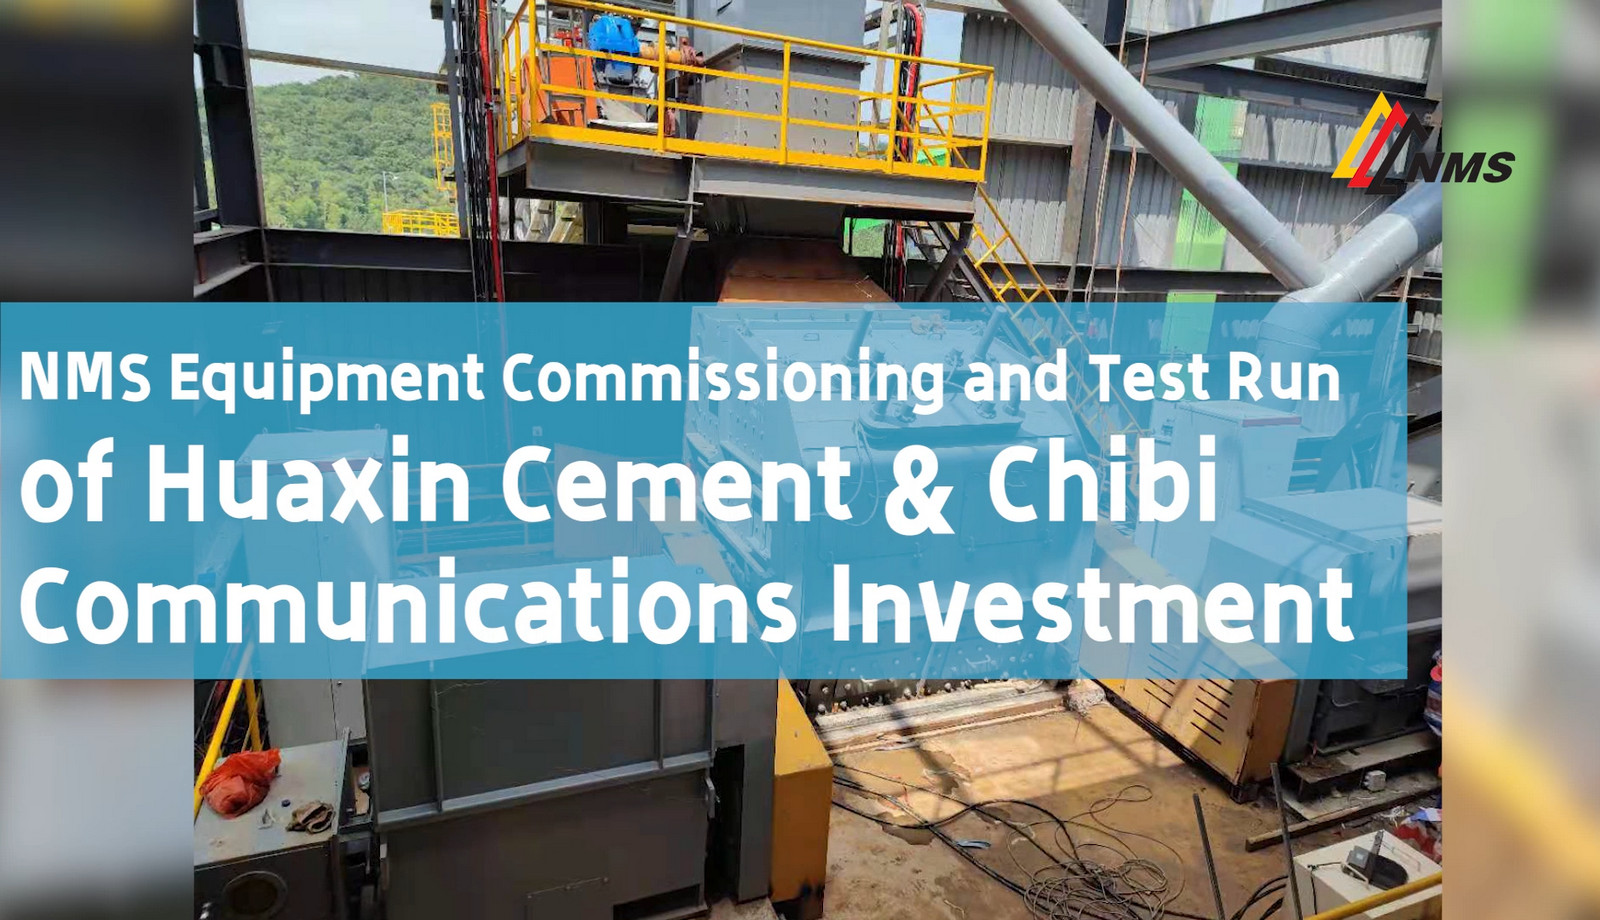 NMS Equipment Commissioning and Test Run of Huaxin Cement & Chibi Communications Investment